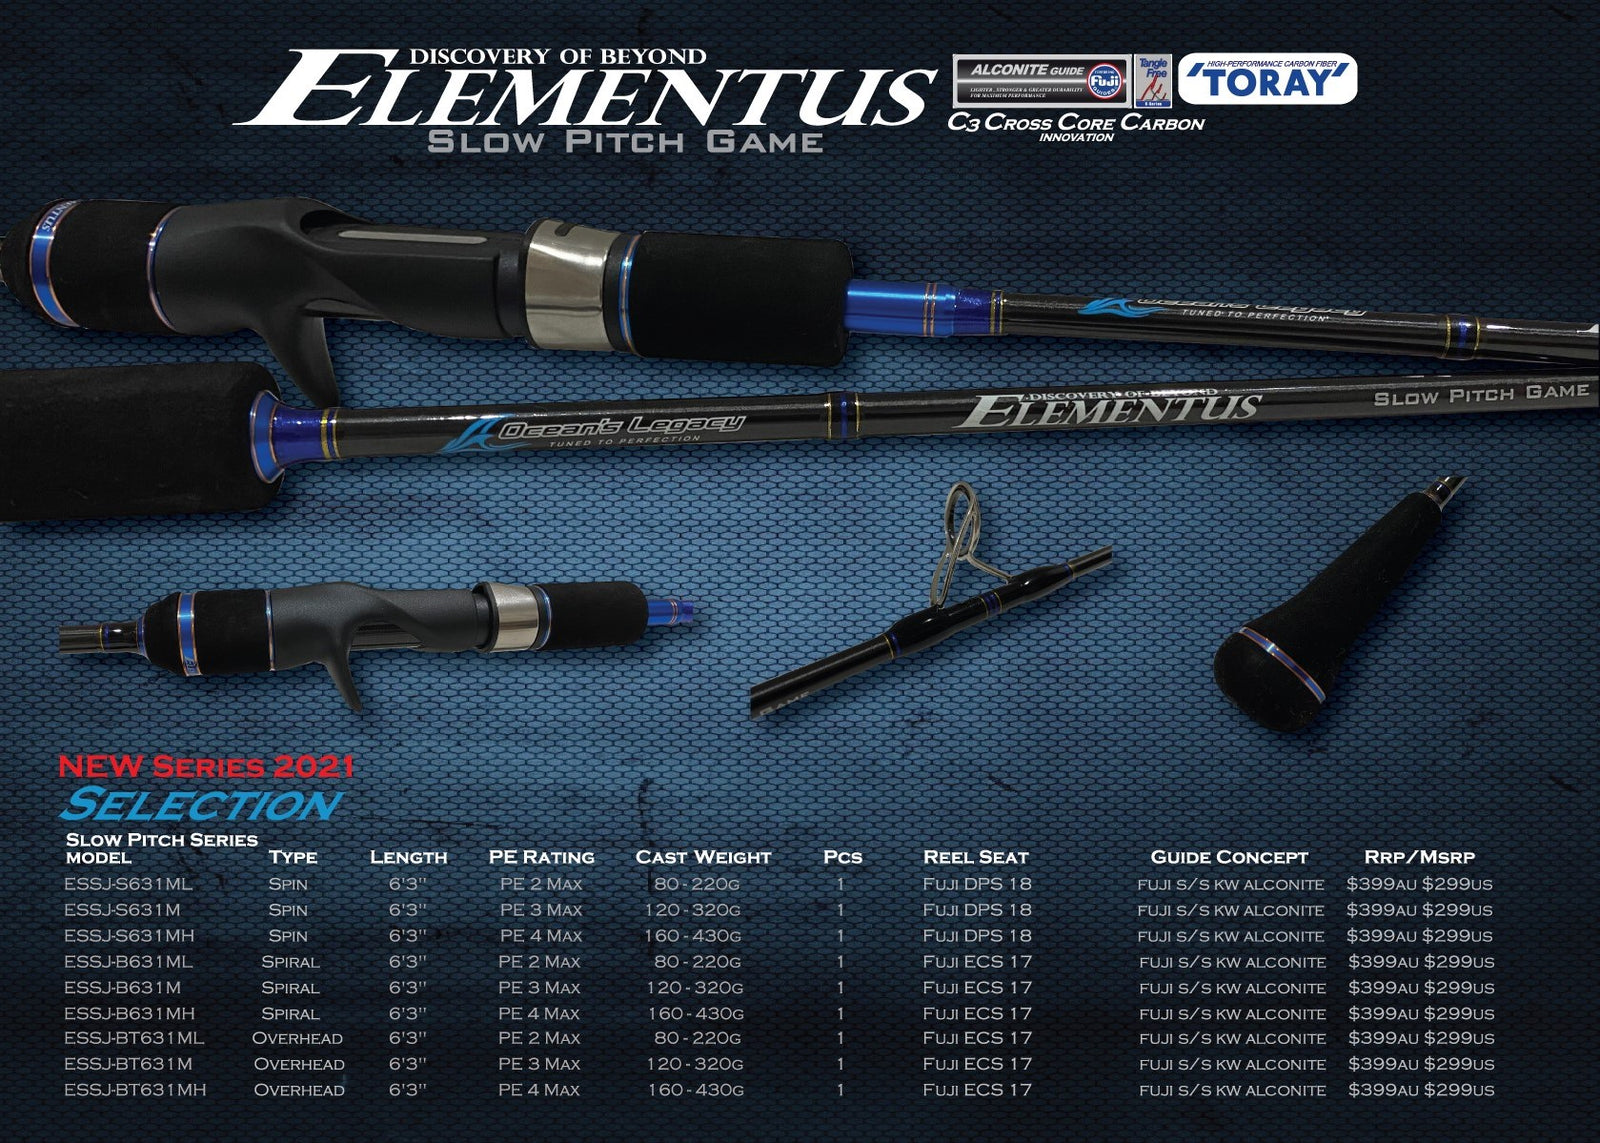 Shop for Fishing Gear Online - Rods, Reels, Lures & more Page 66